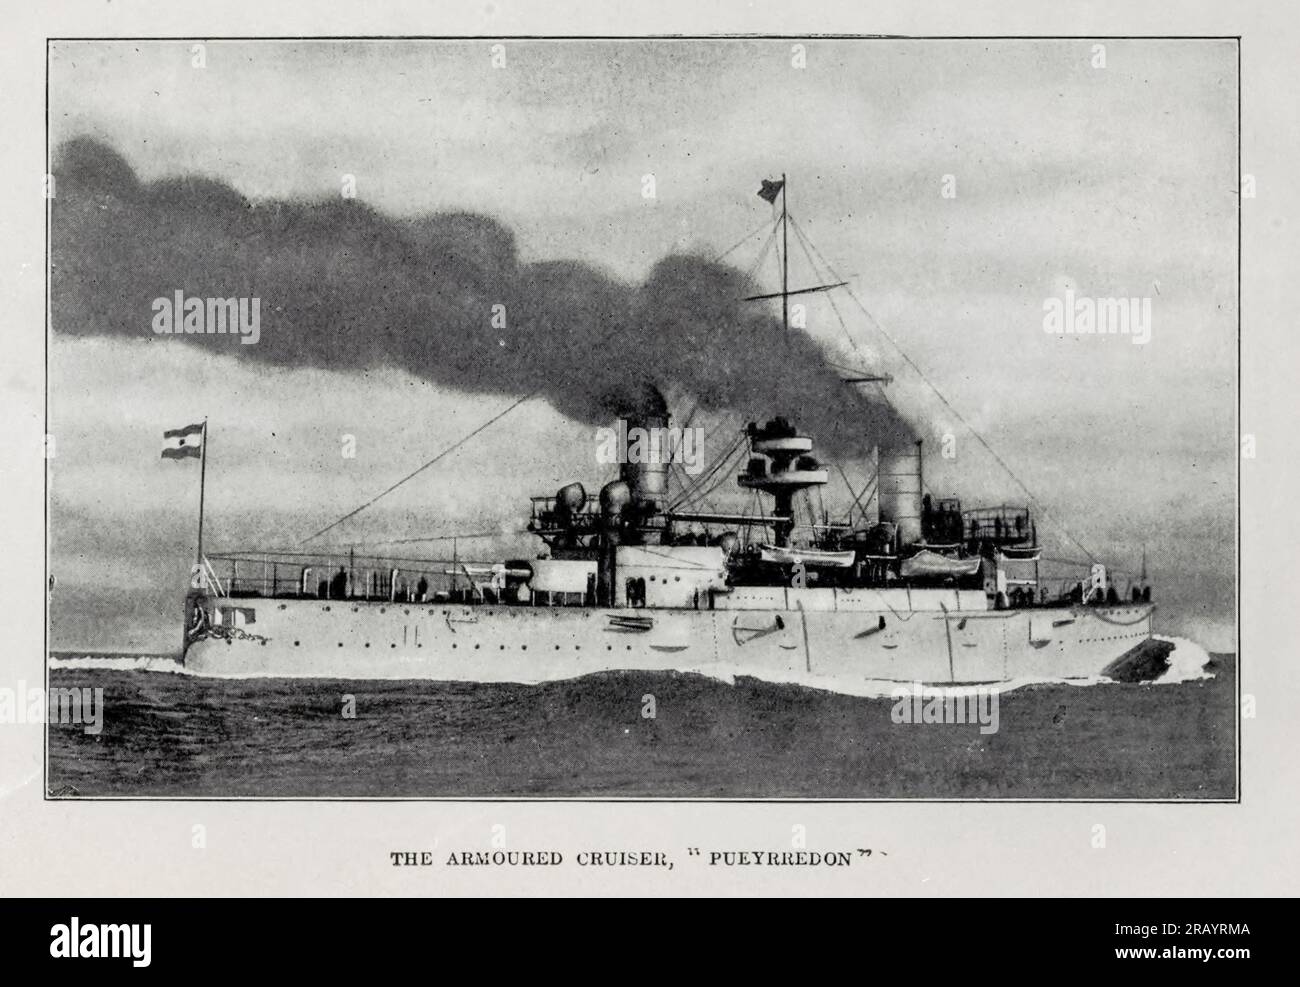 The Armoured Cruiser, 'Pueyrredon' dal libro Argentina and Her People of To-day : An account of the Customs, characteristics, Fun, history and progress of the Argentinians, and the Development and resources of their country by Winter, Nevin O. (Nevin otto), 1869-1936 pubblicato a Boston da L.C. Pagina su 1911 Foto Stock